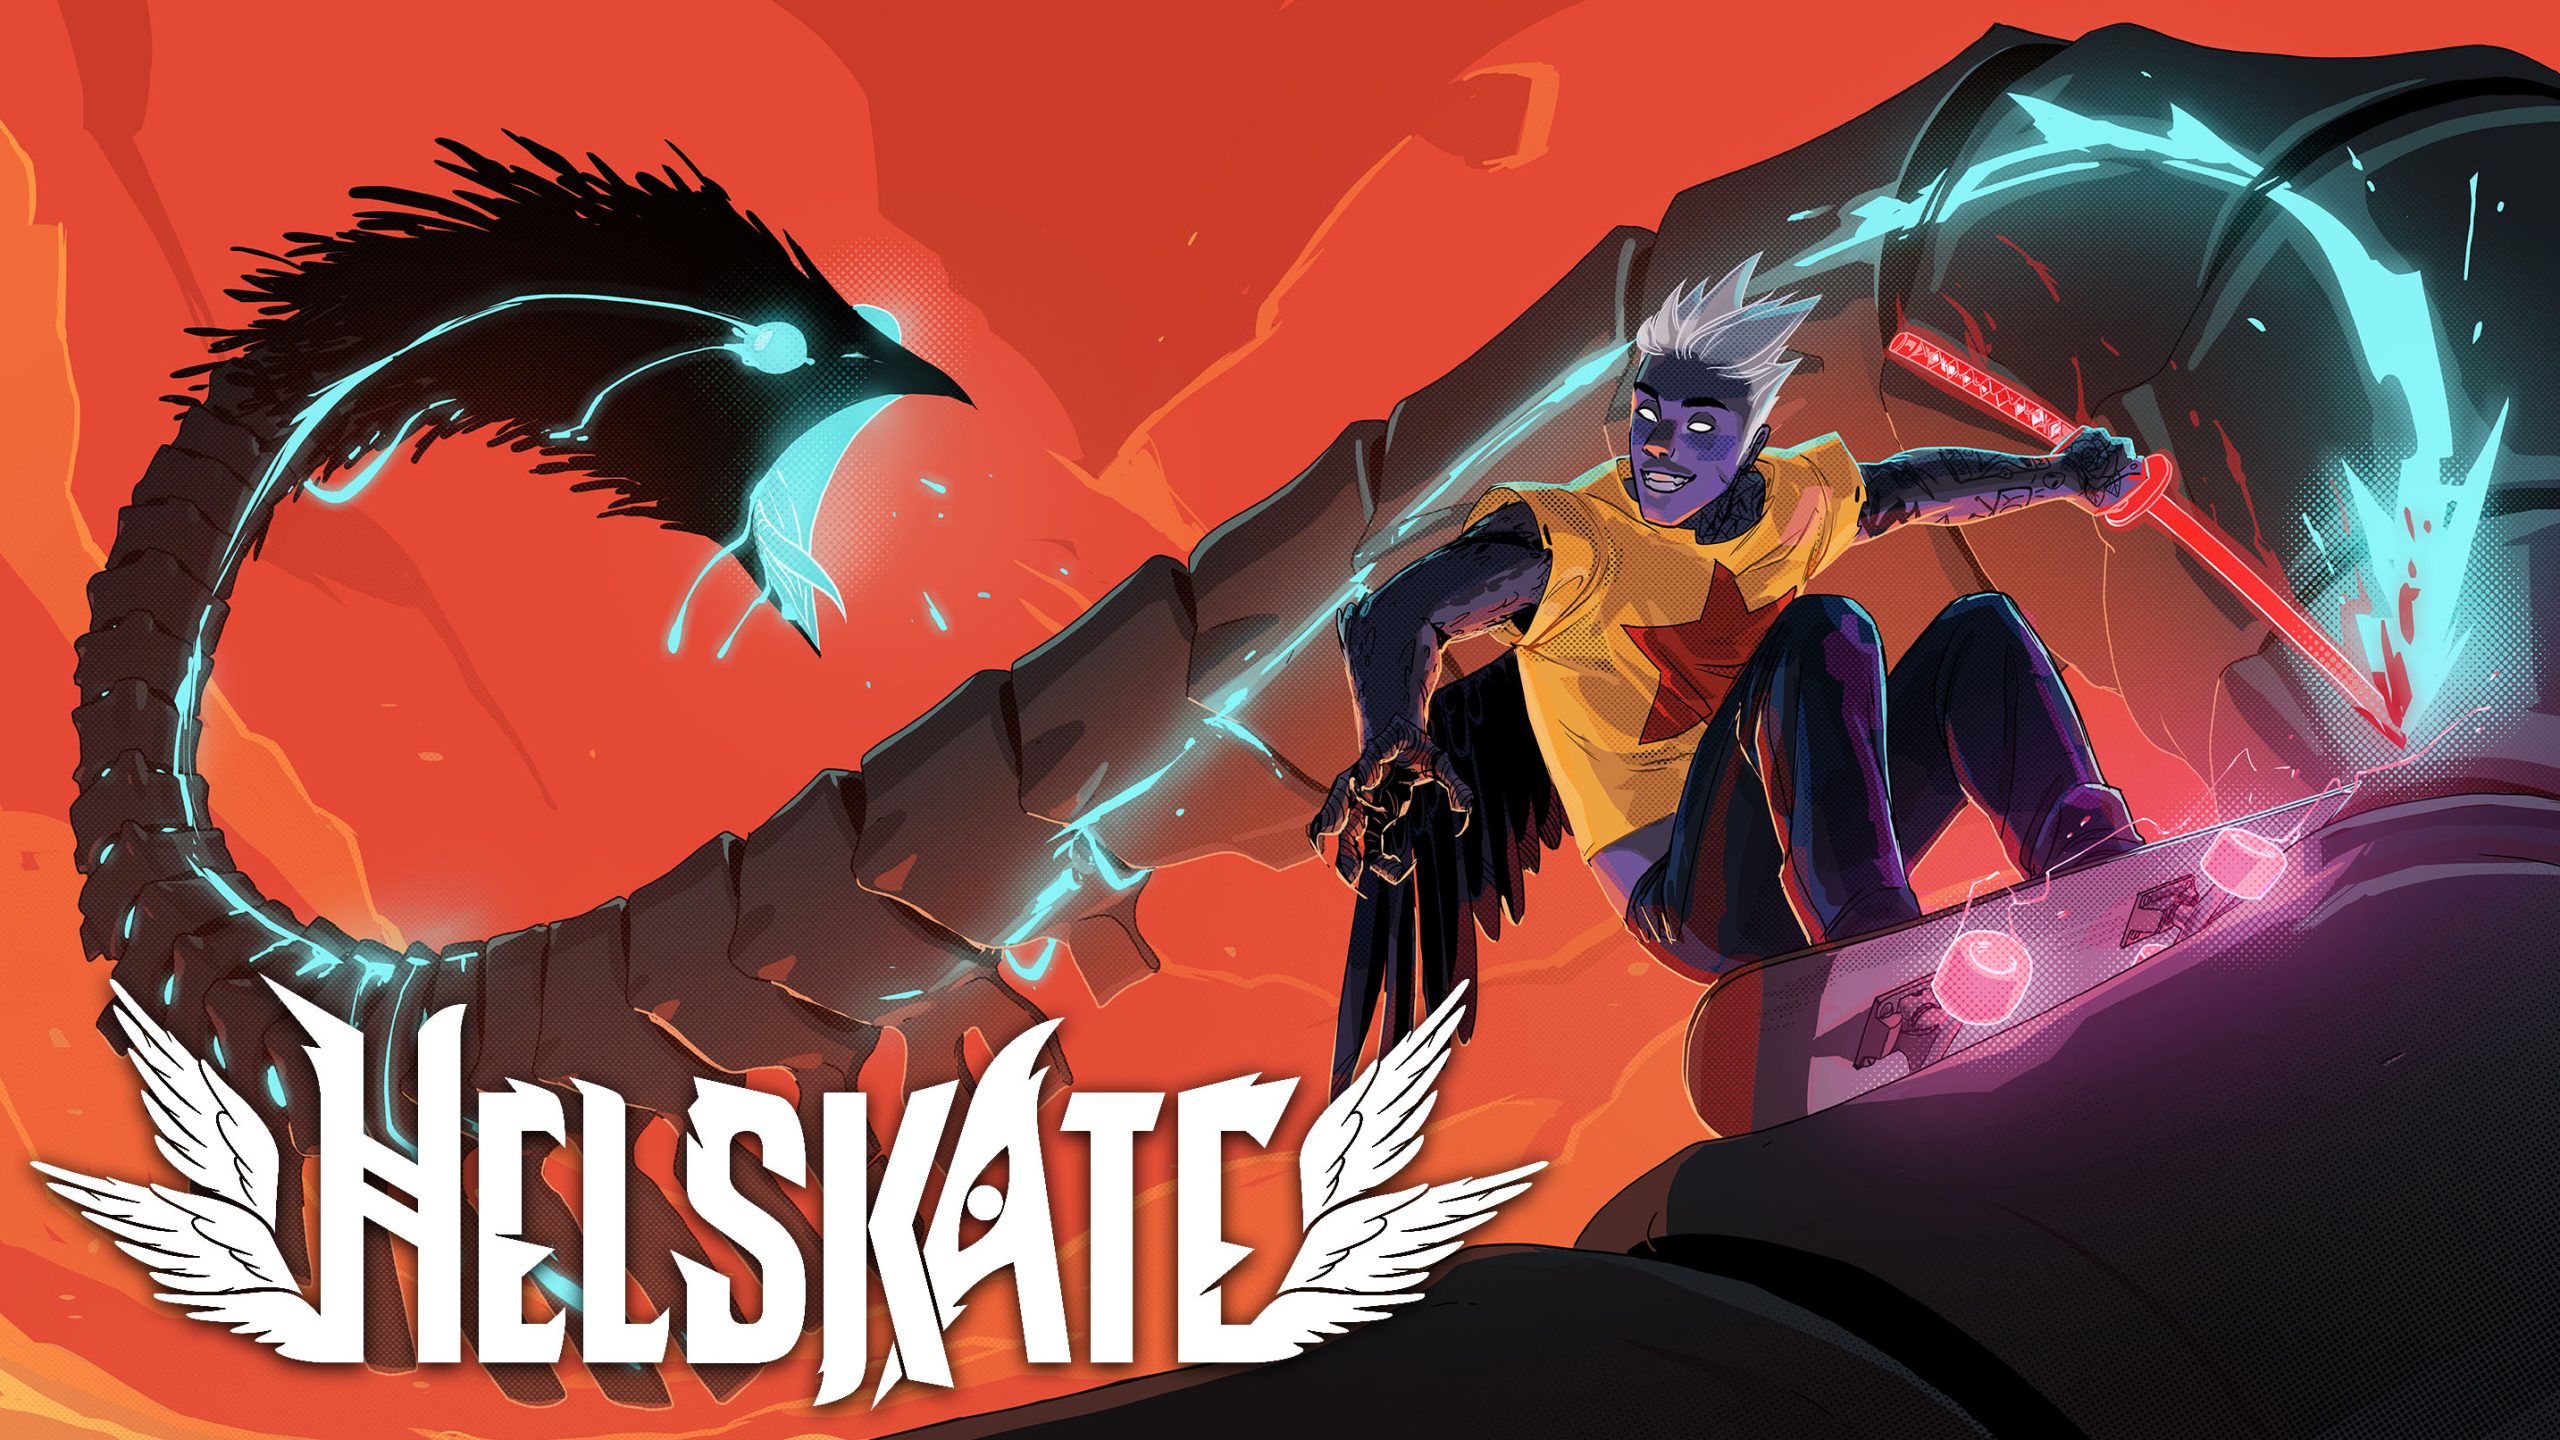 Skateboarding Roguelike Helskate Launches on Early Access; 10 Hours of Content, Plays on Steam Deck